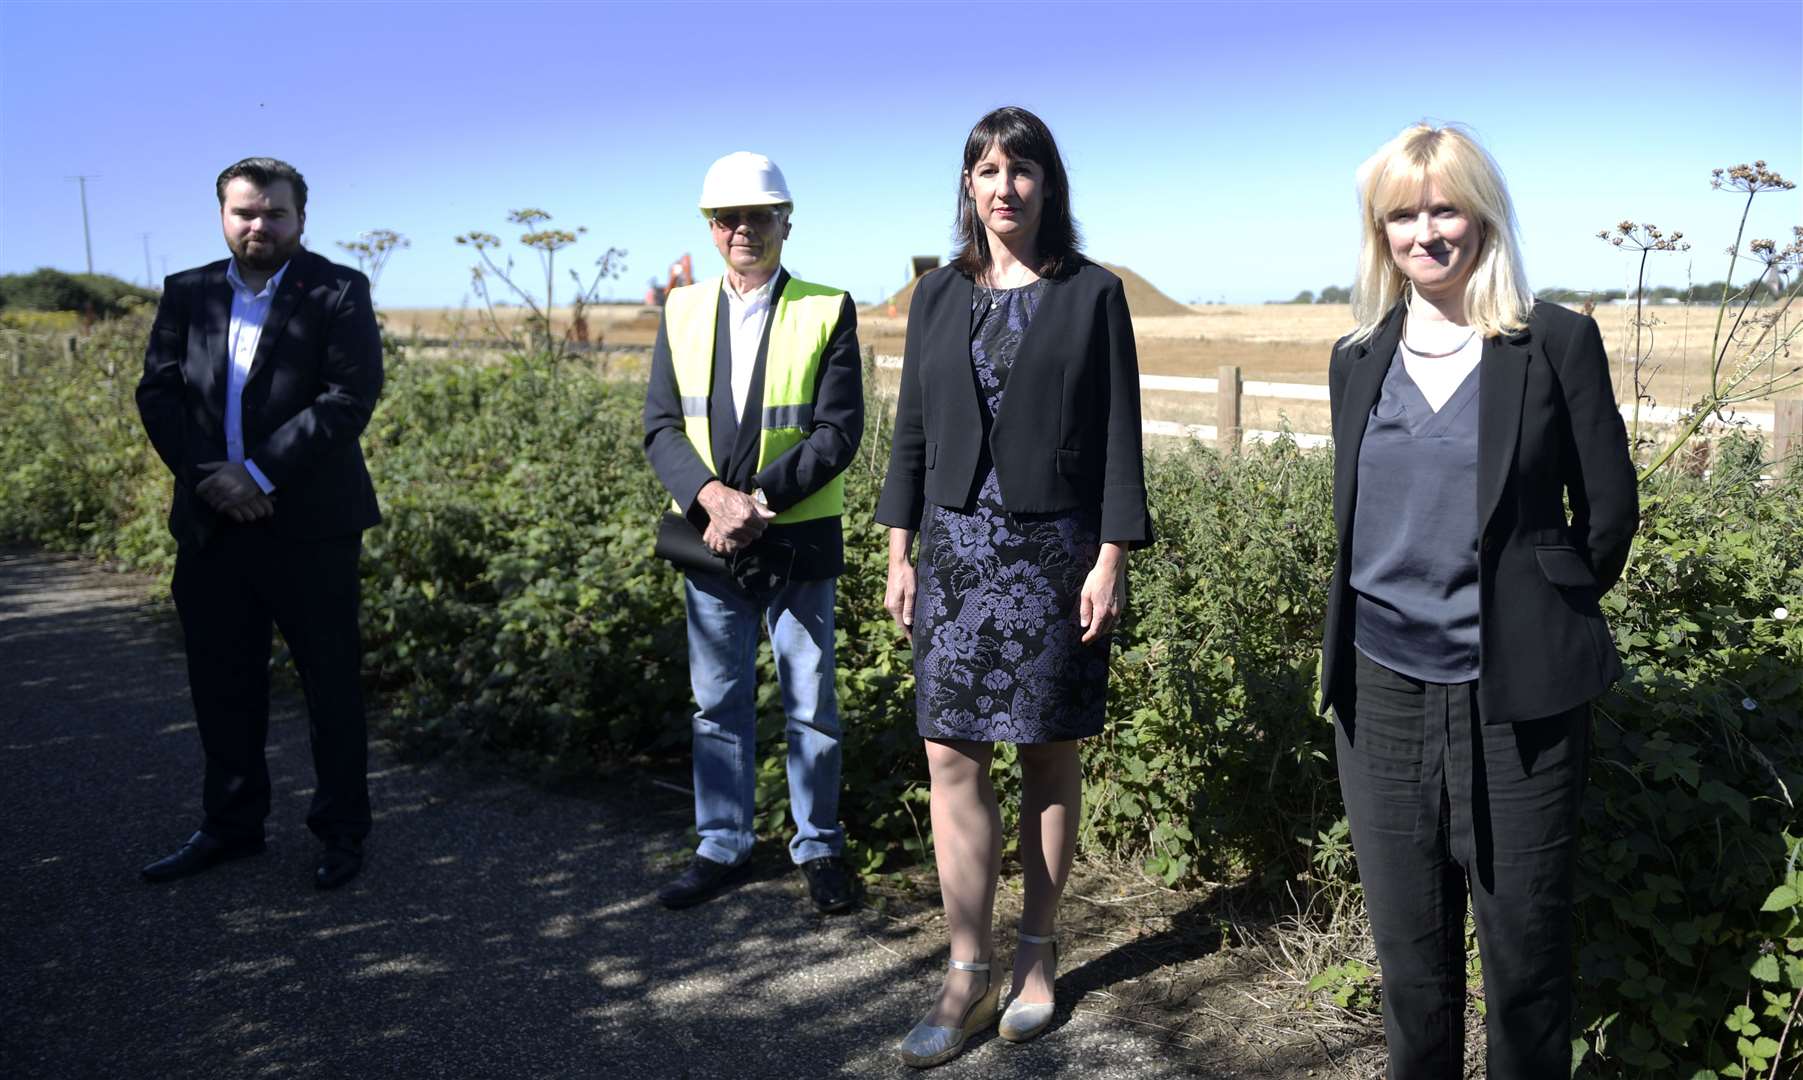 Cllr Dara Farrell (left) visited the site in July with Richard Lavender of the Kent Invicta Chamber of Commerce, Rachel Reeves - shadow chancellor of the Duchy of Lancaster - and Canterbury MP Rosie Duffield